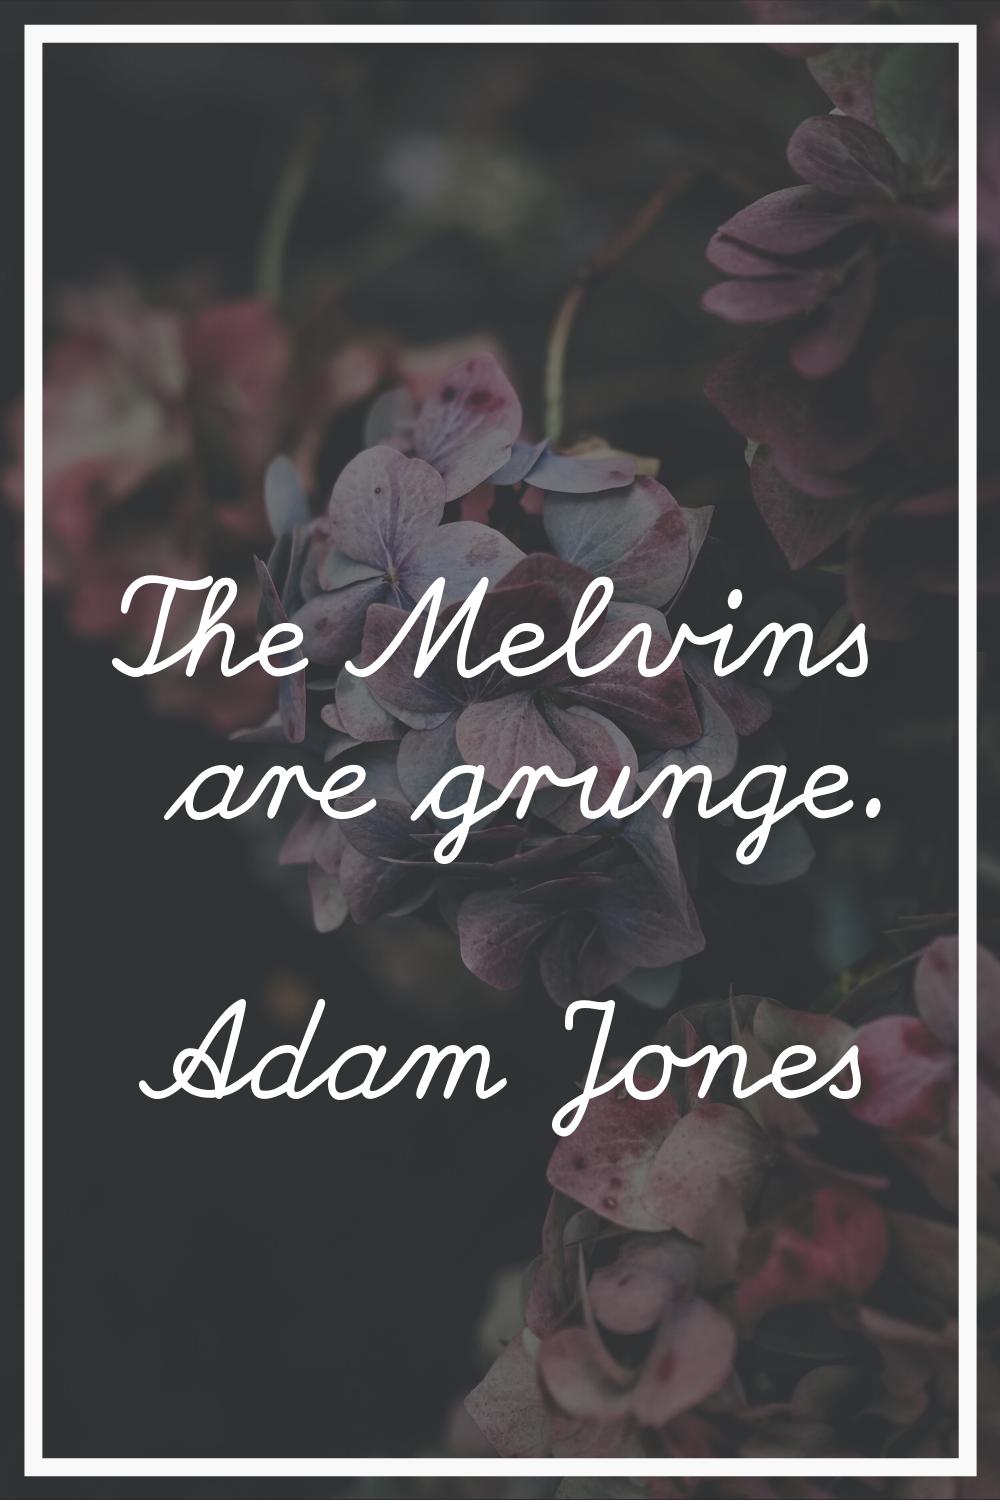 The Melvins are grunge.